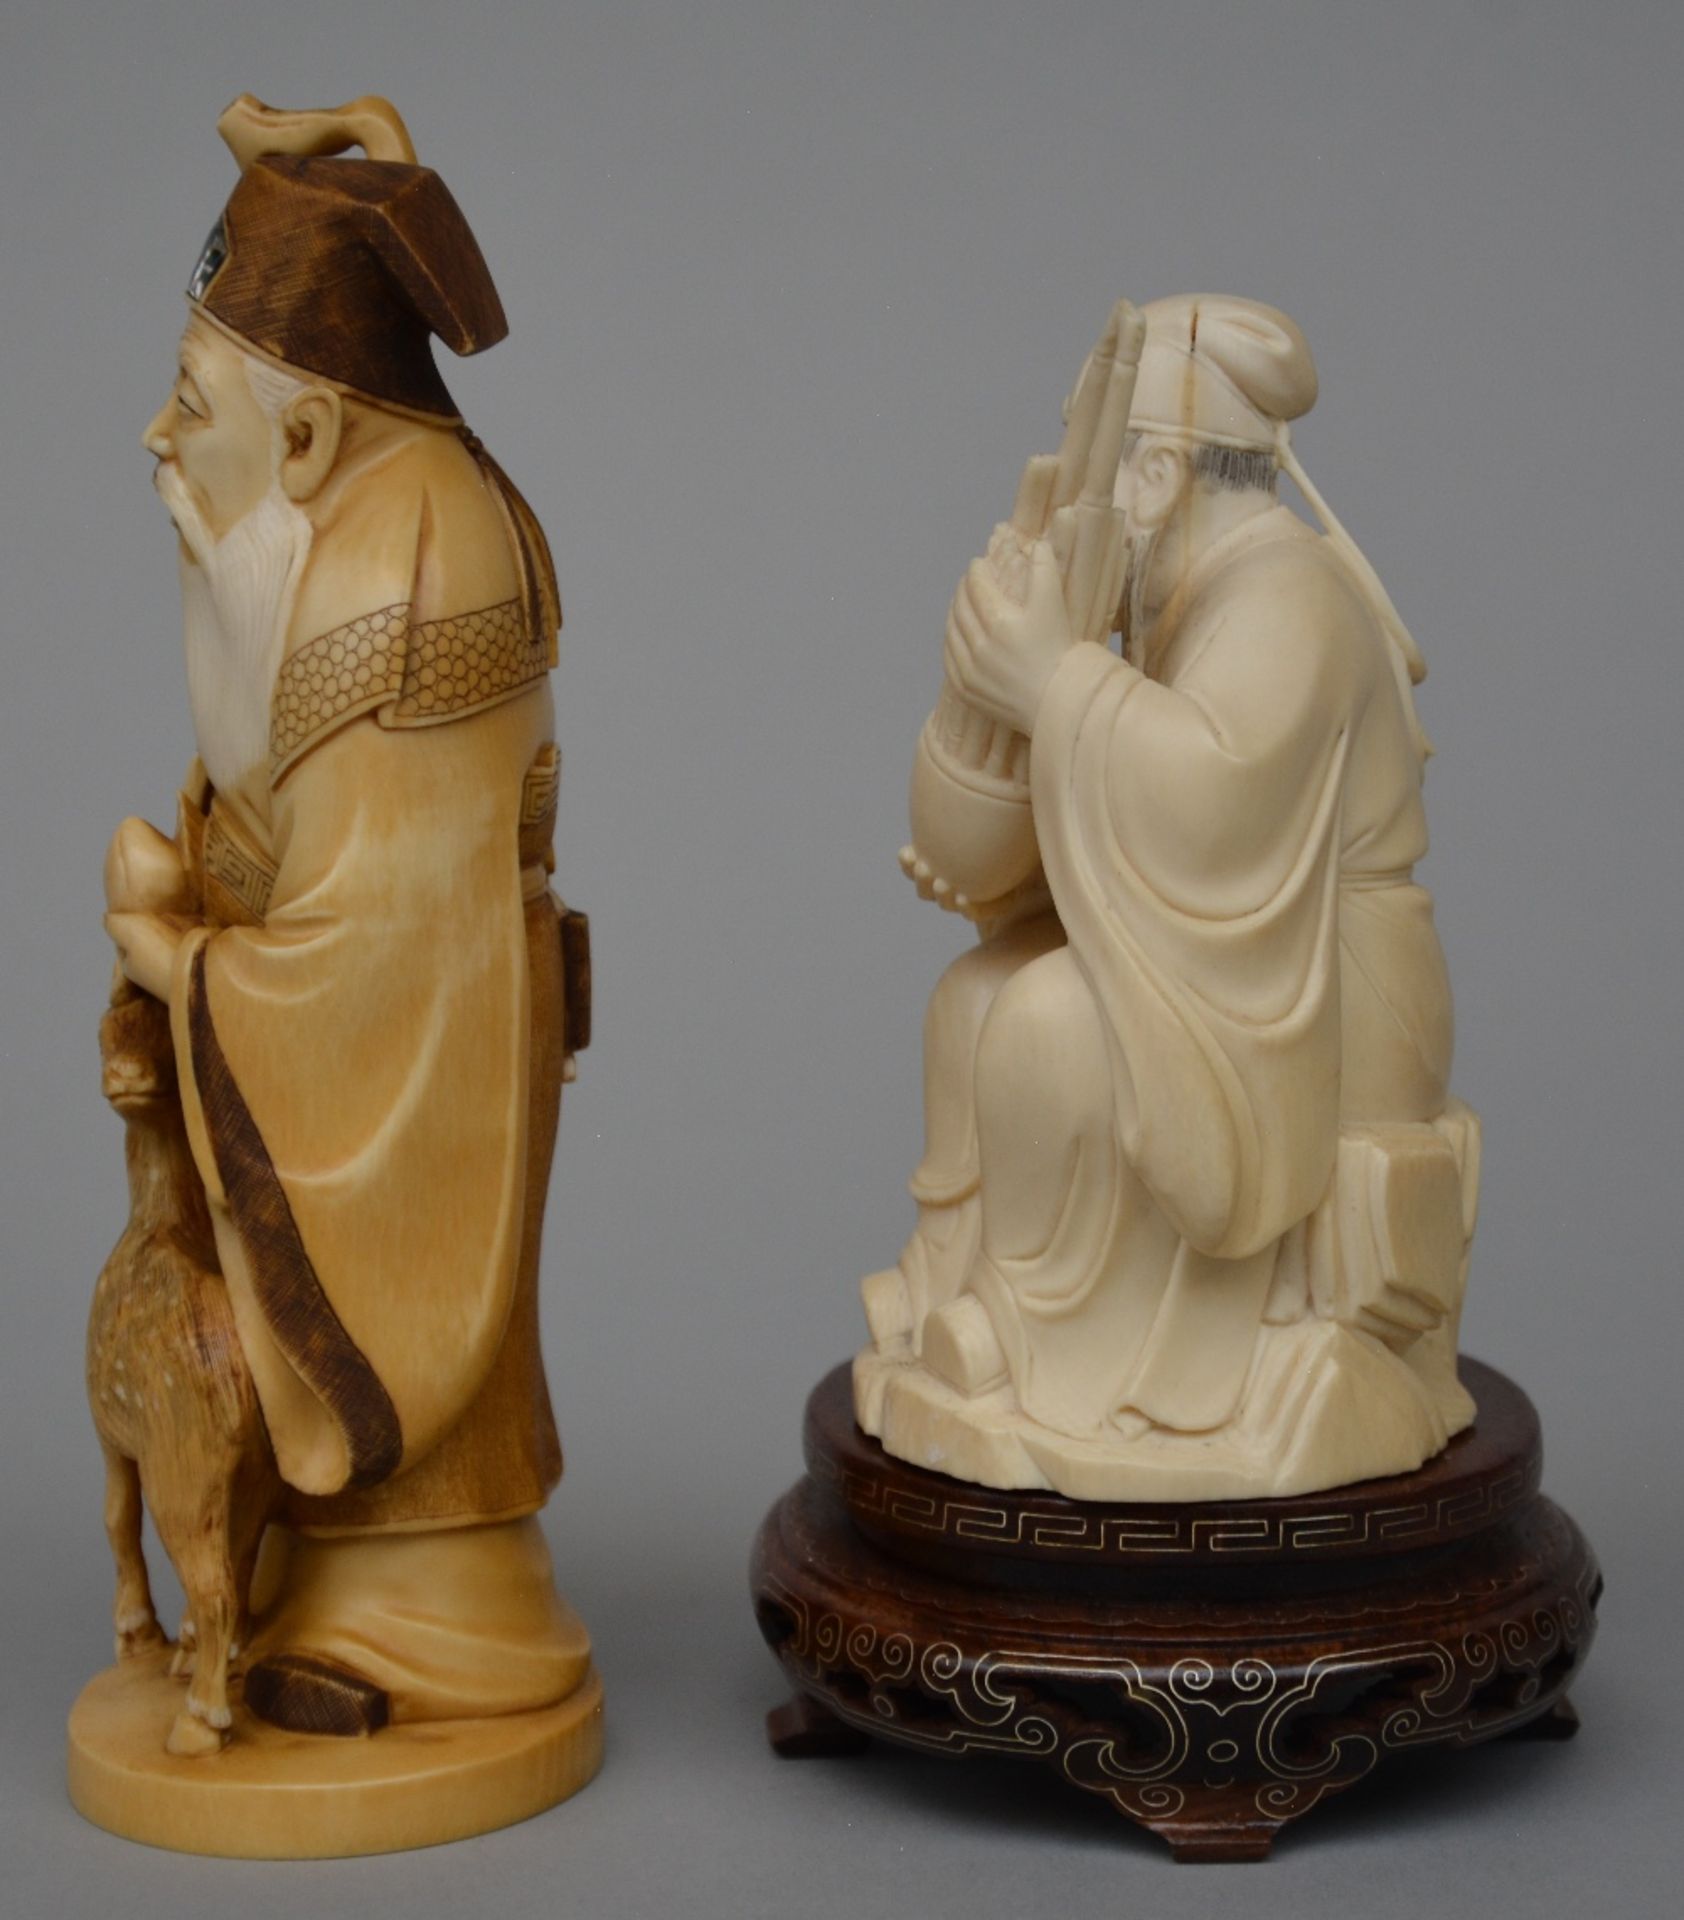 A Japanese ivory sculpture of the Old Man of the South Pole, scrimshaw decorated and tinted, late - Image 2 of 6